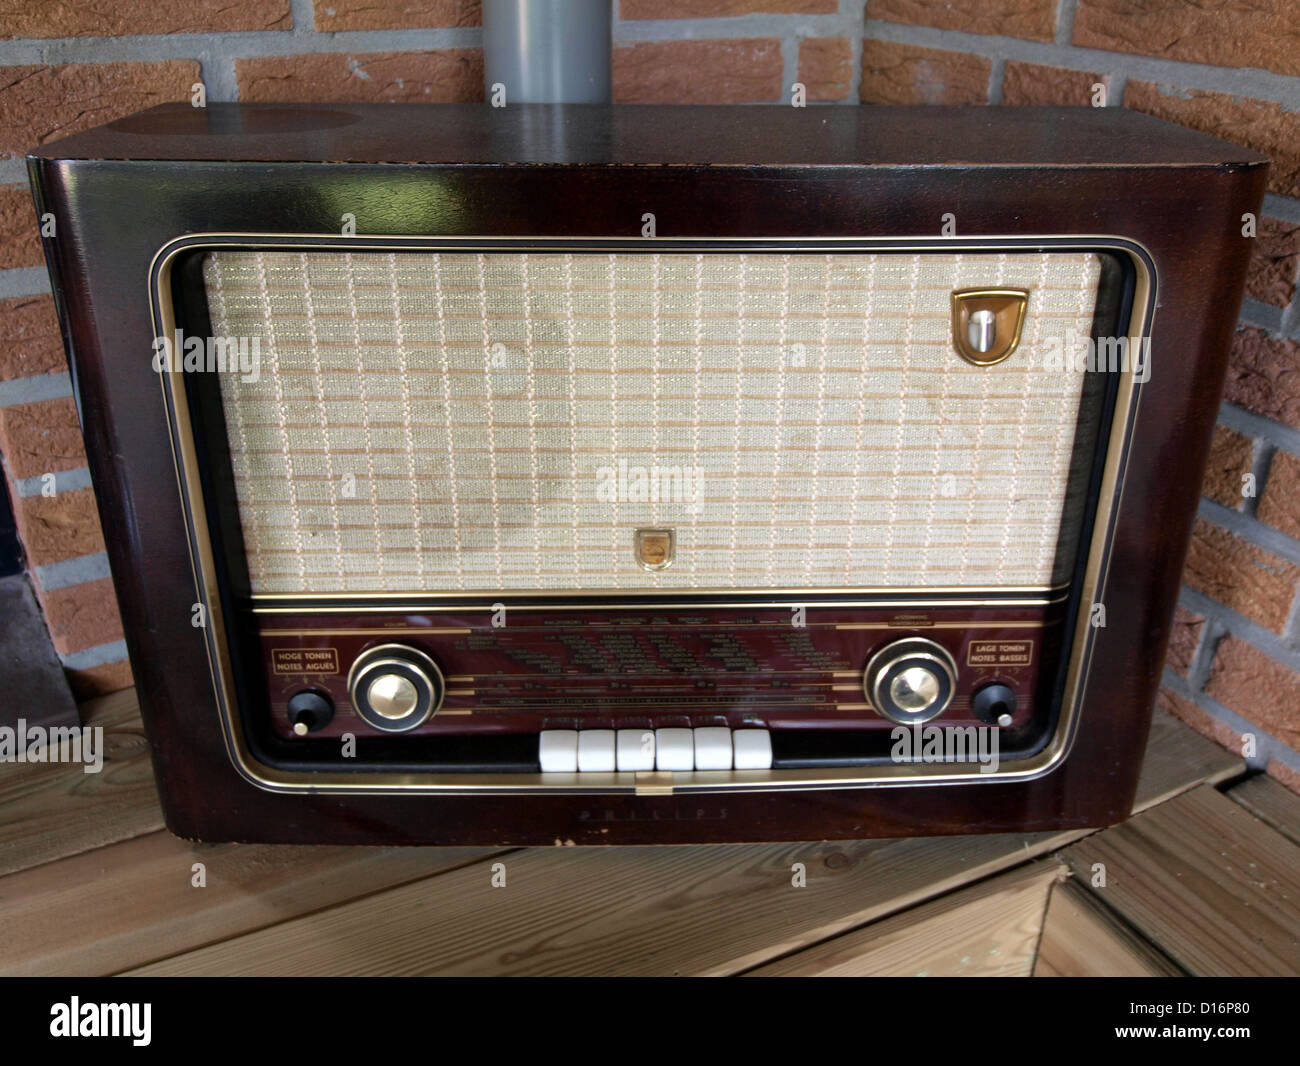 Philips Radio High Resolution Stock Photography and Images - Alamy